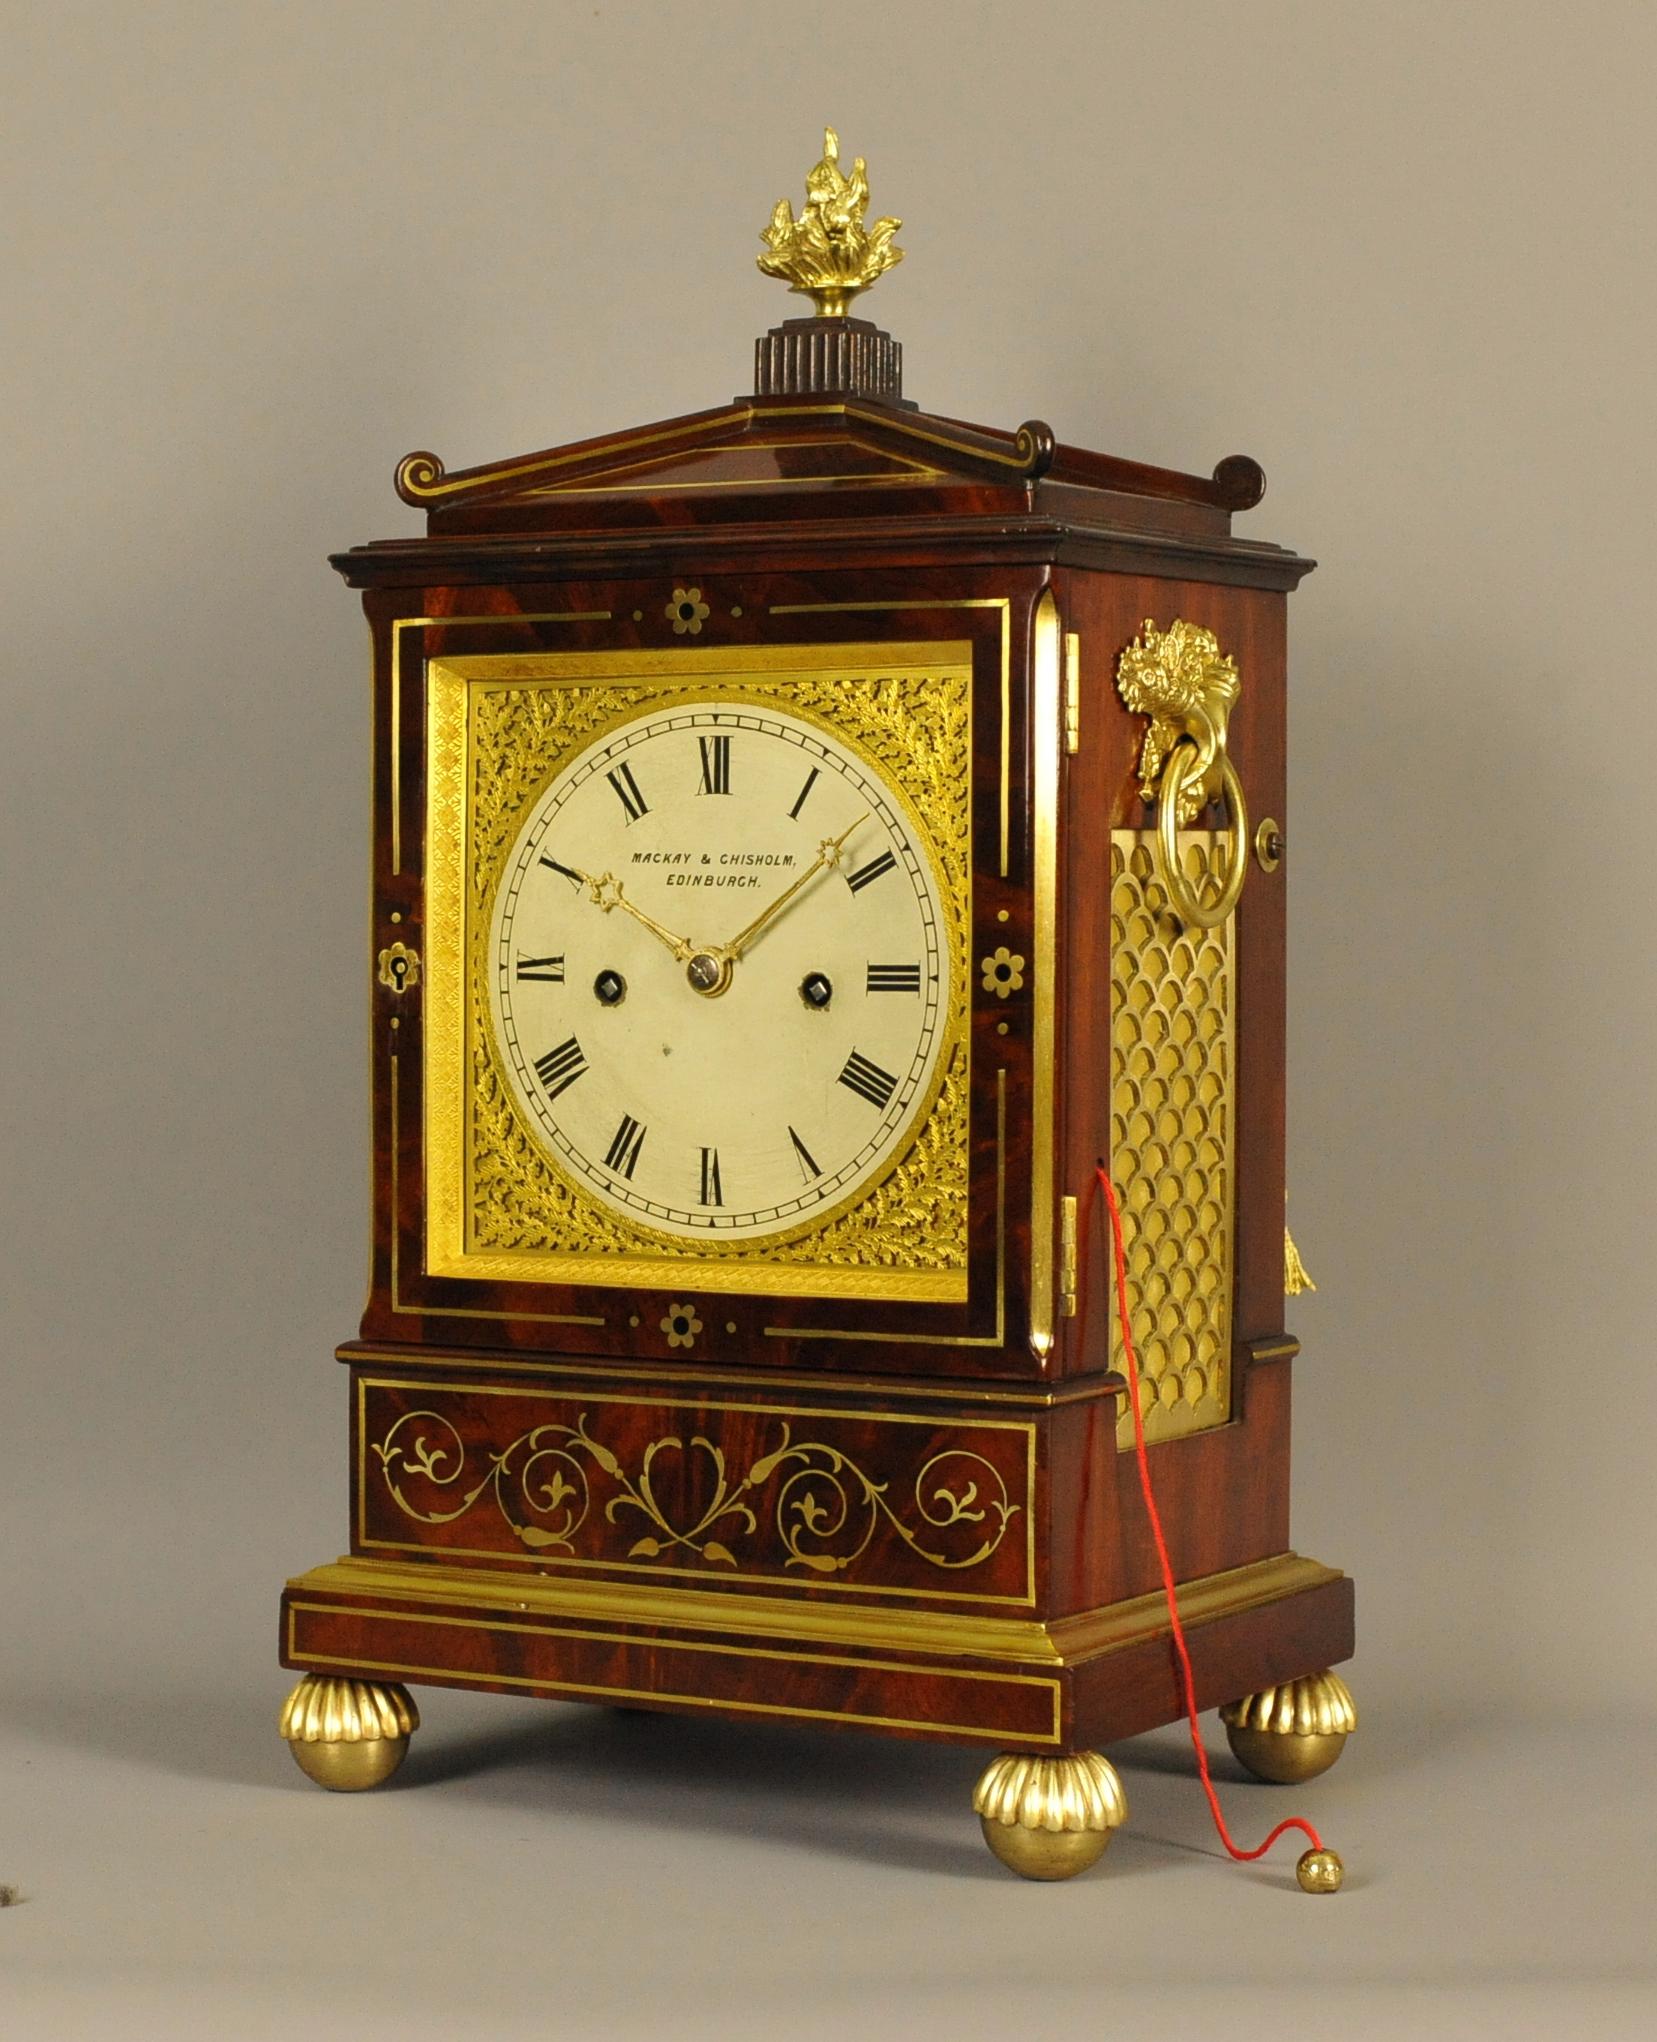 This is a very fine and impressive English bracket / mantel (fireplace) clock clock of the very finest quality made circa 1810 which is in the most wonderful condition which was made by father and son James and William Howden who worked from Hunter